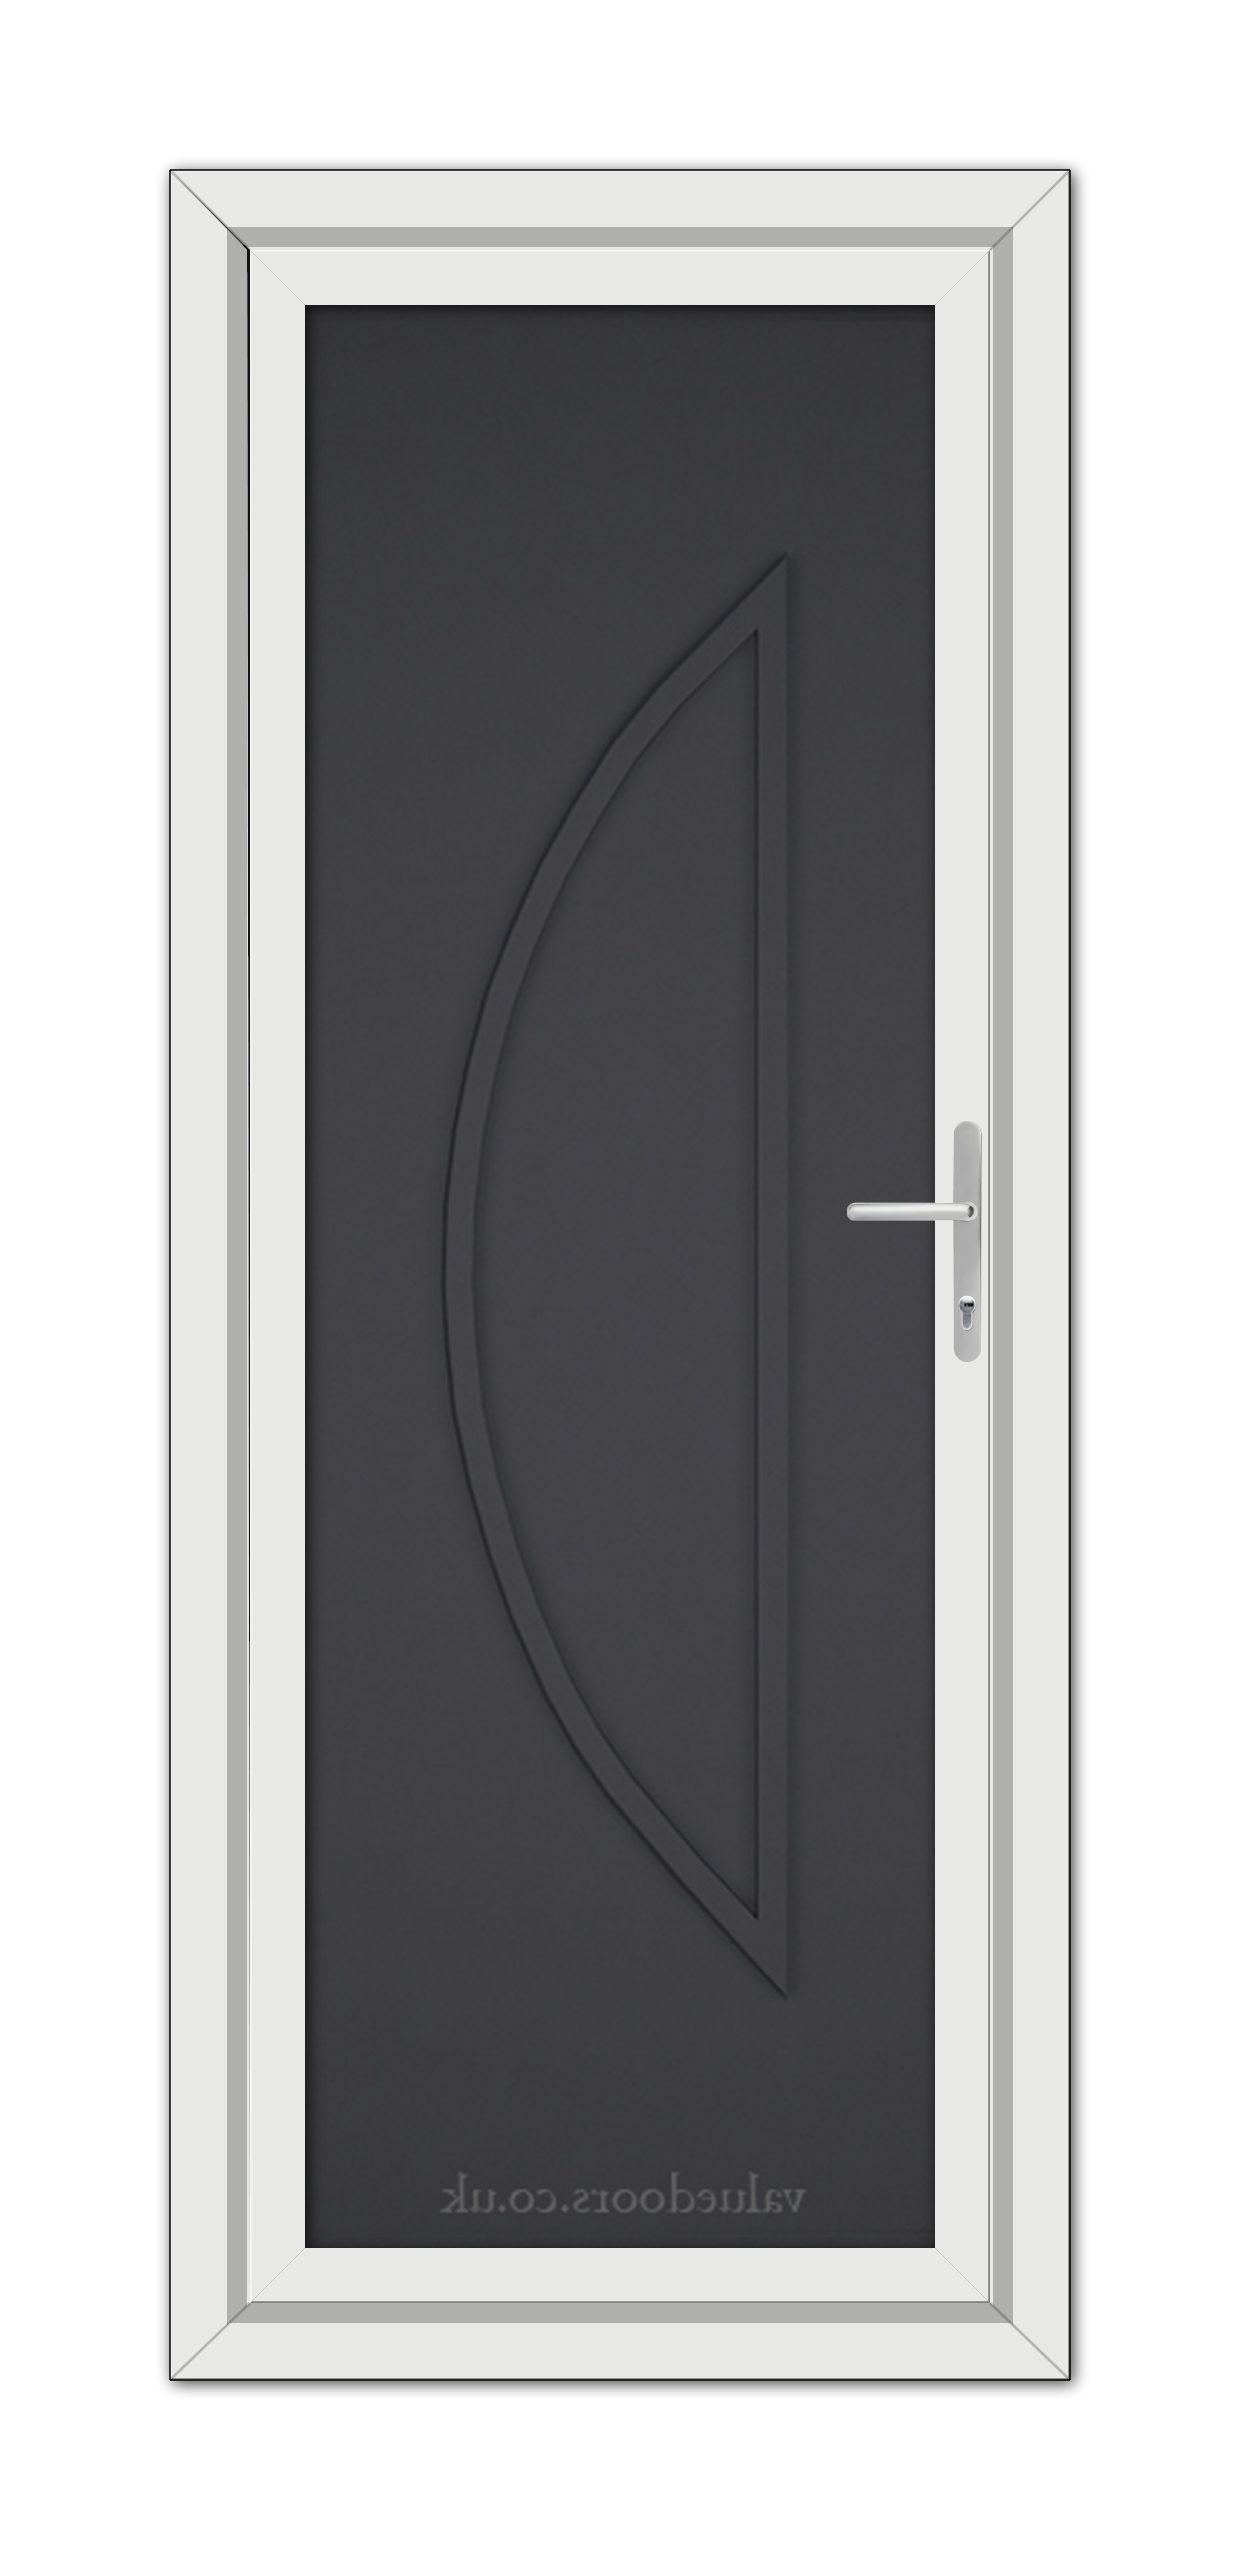 A Grey Modern 5051 Solid uPVC door with an asymmetrical raised panel design, silver handle, and white frame, viewed from the front.